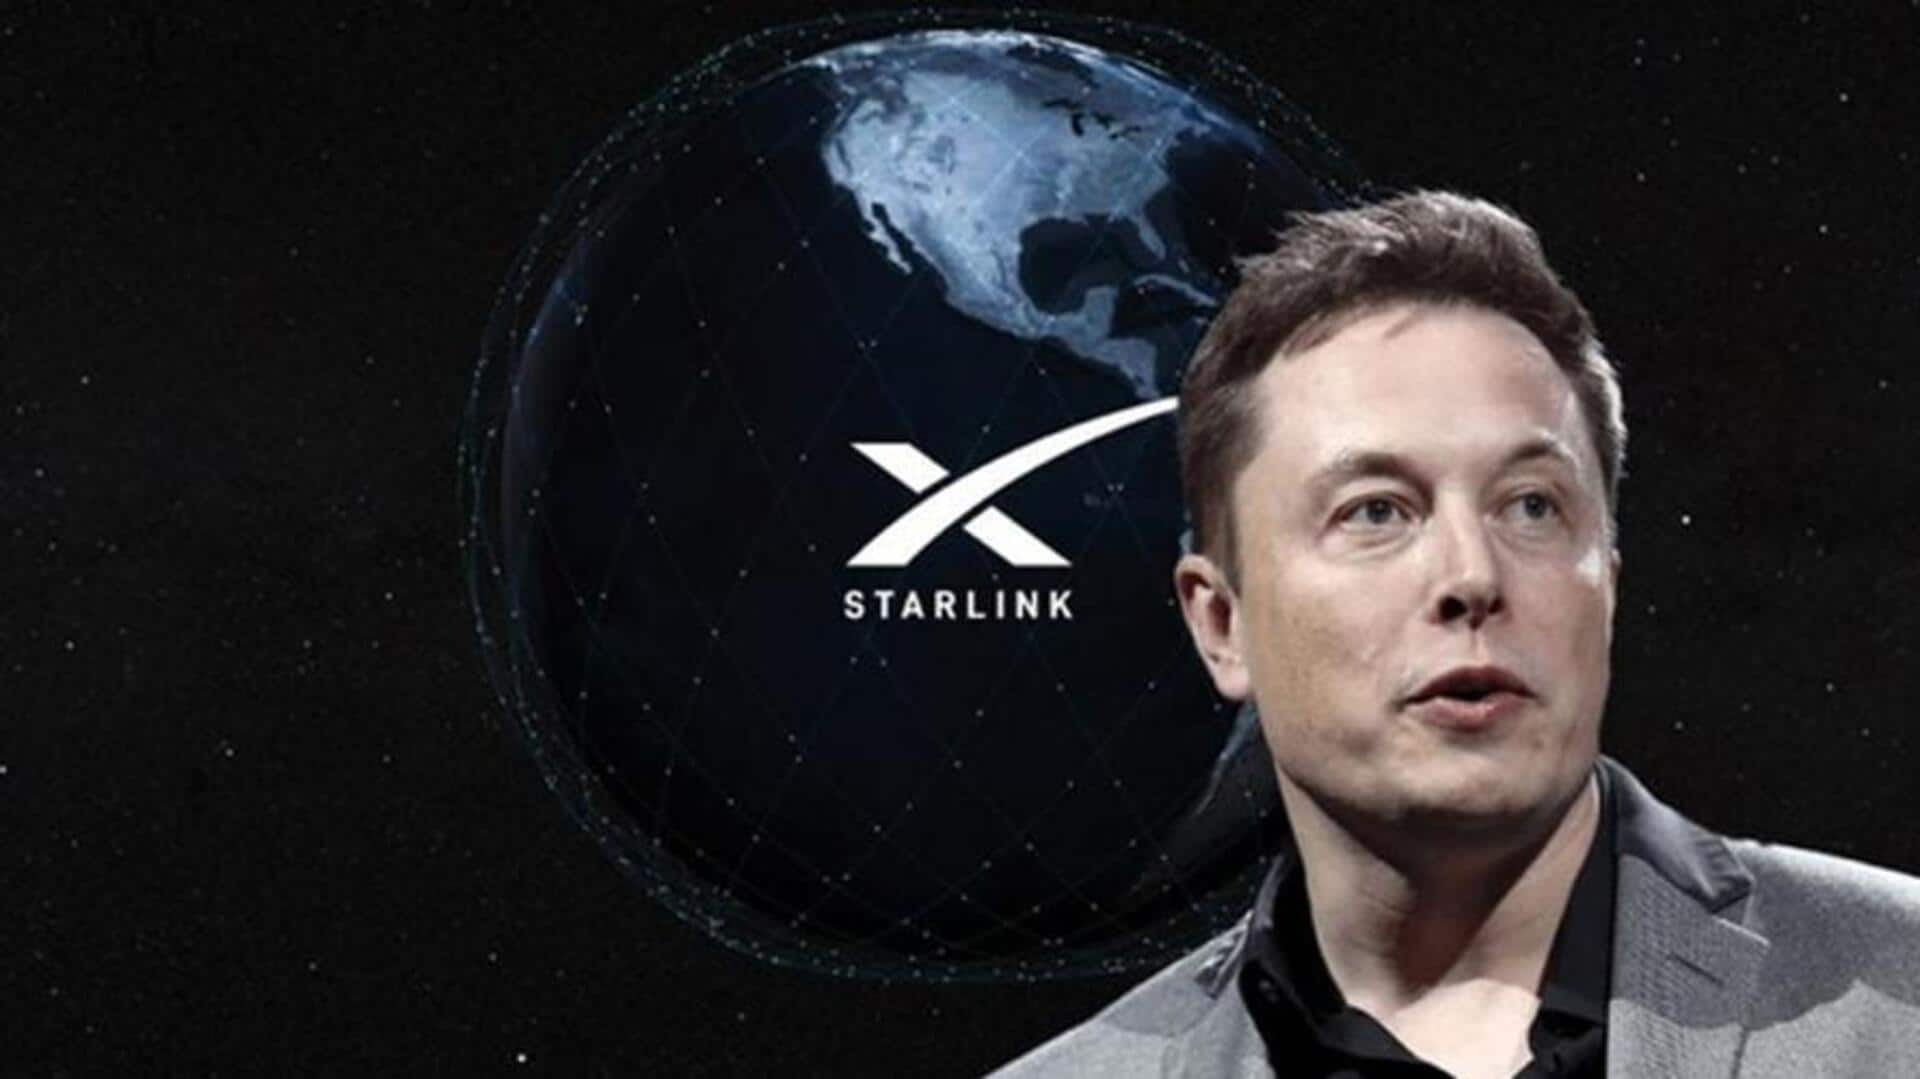 Elon Musk's Starlink could receive approval from Indian government soon